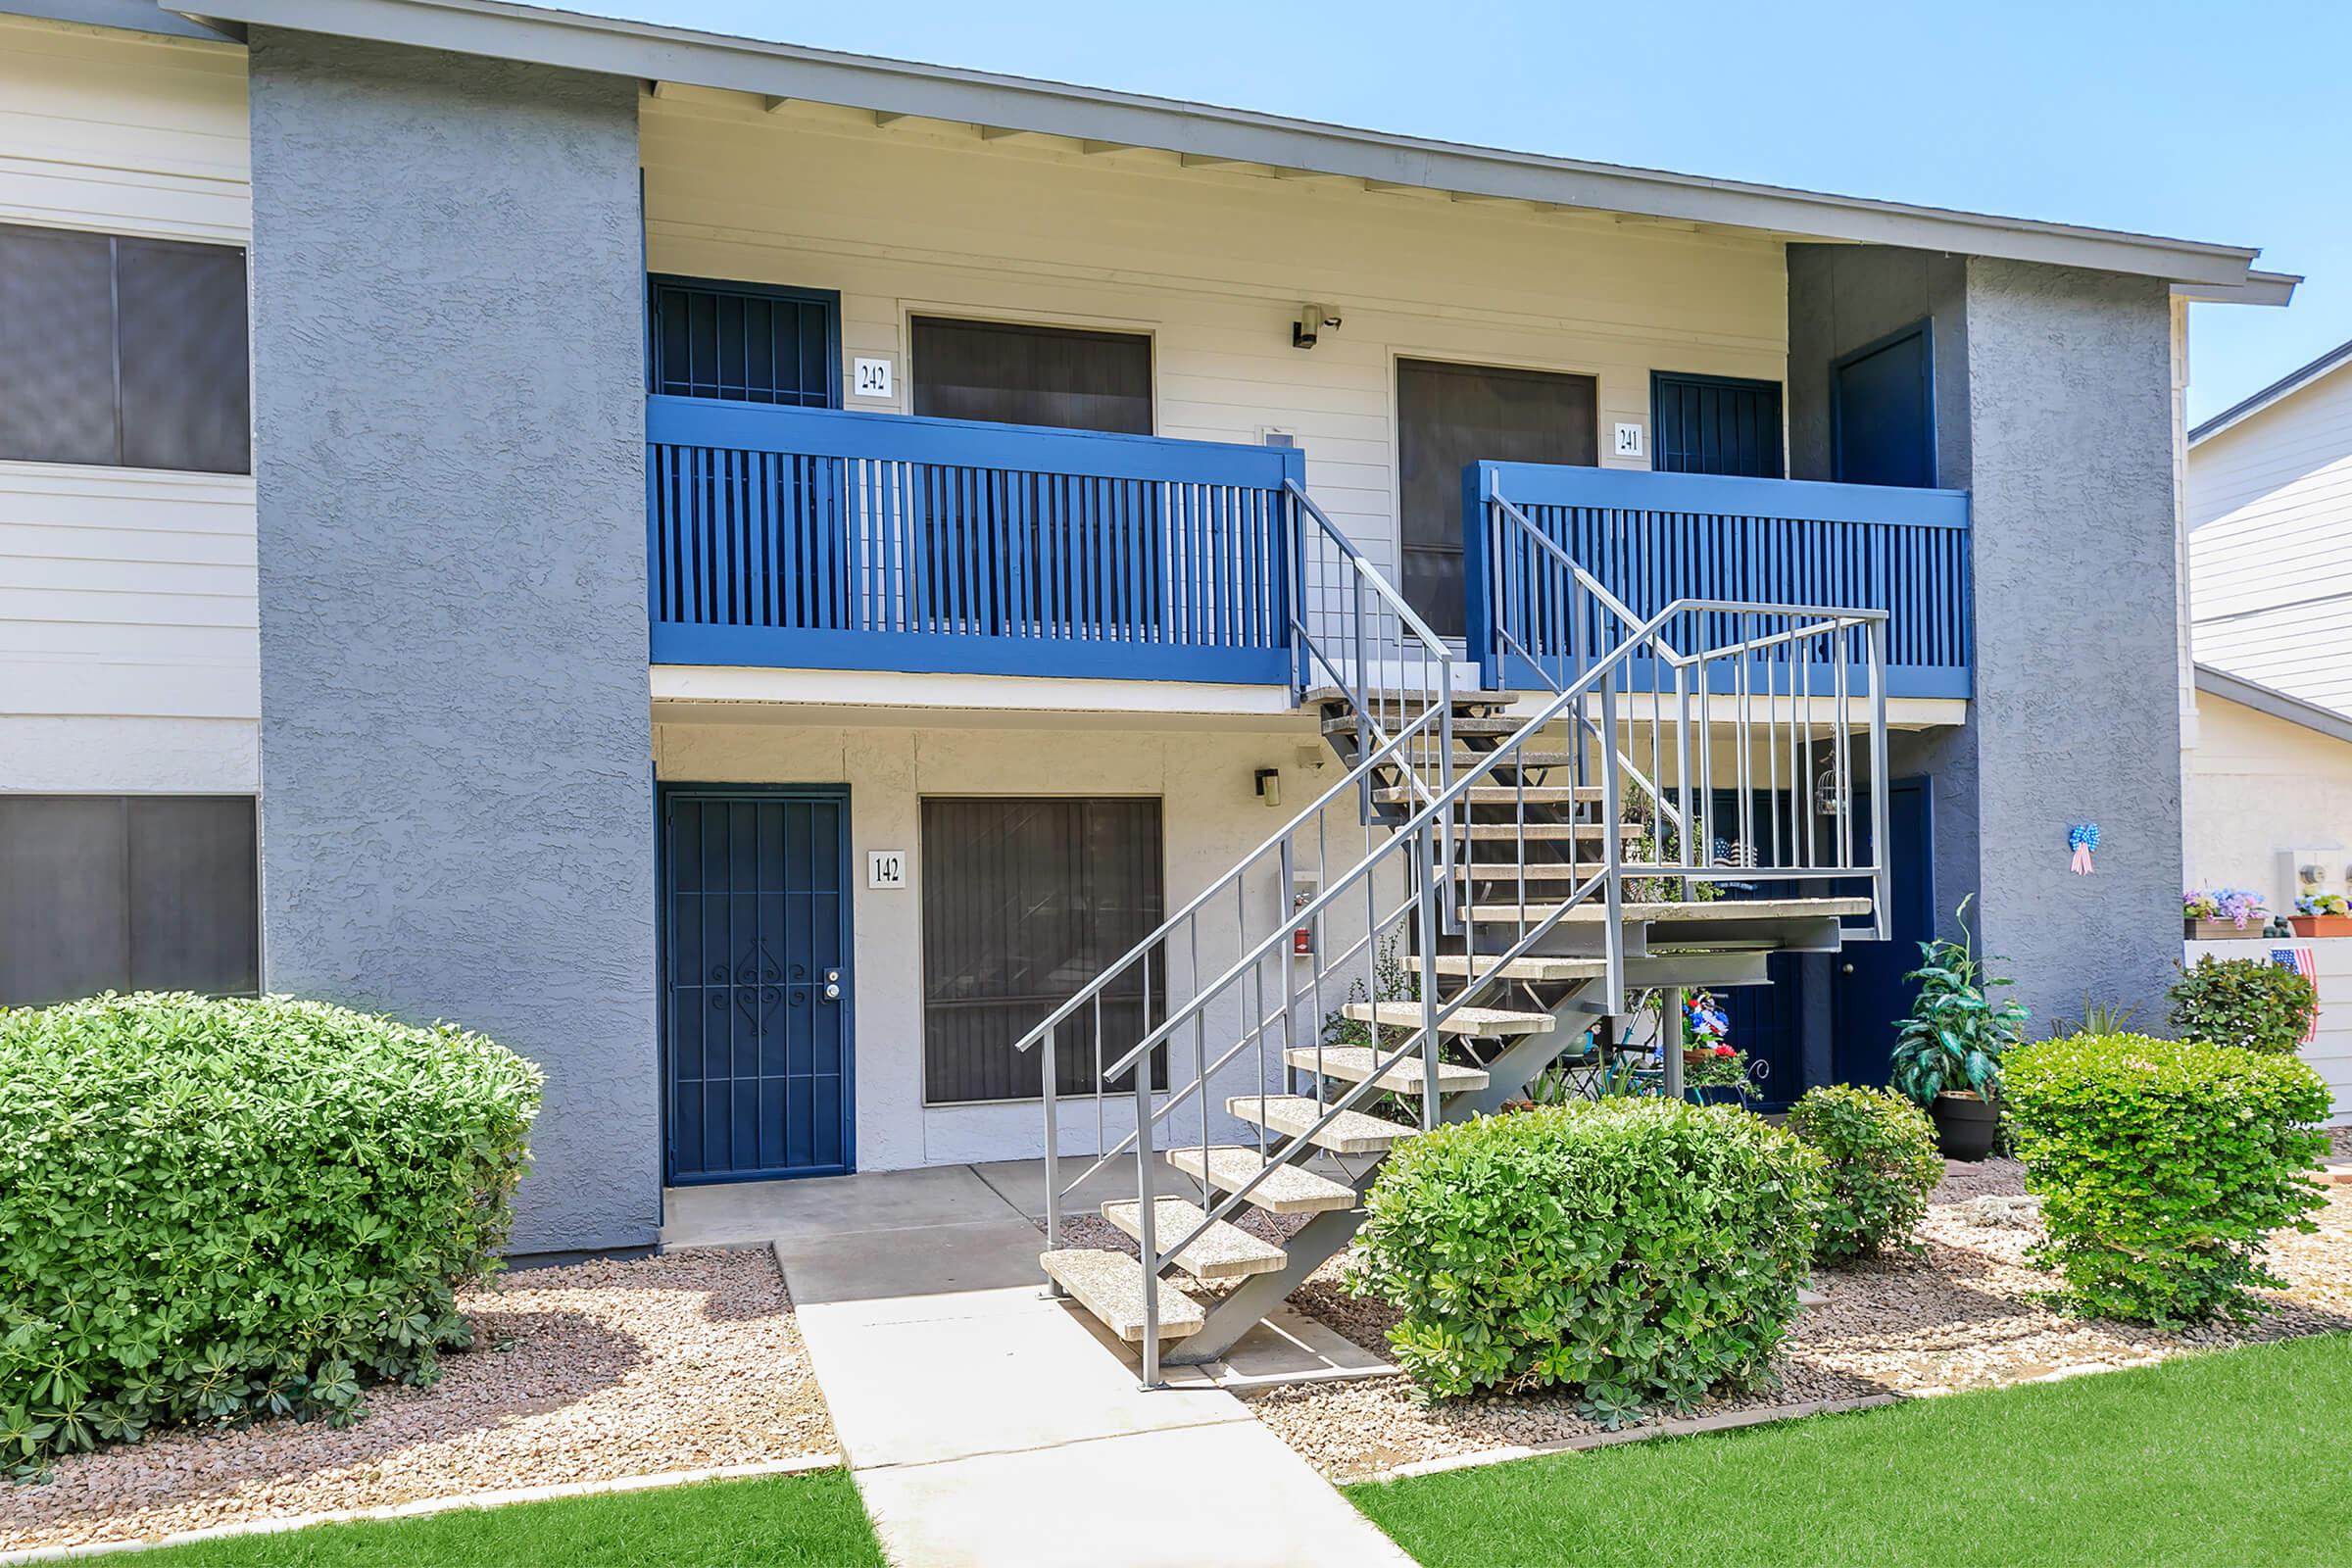 The front view of apartments at Rise North Ridge in Glendale, AZ.